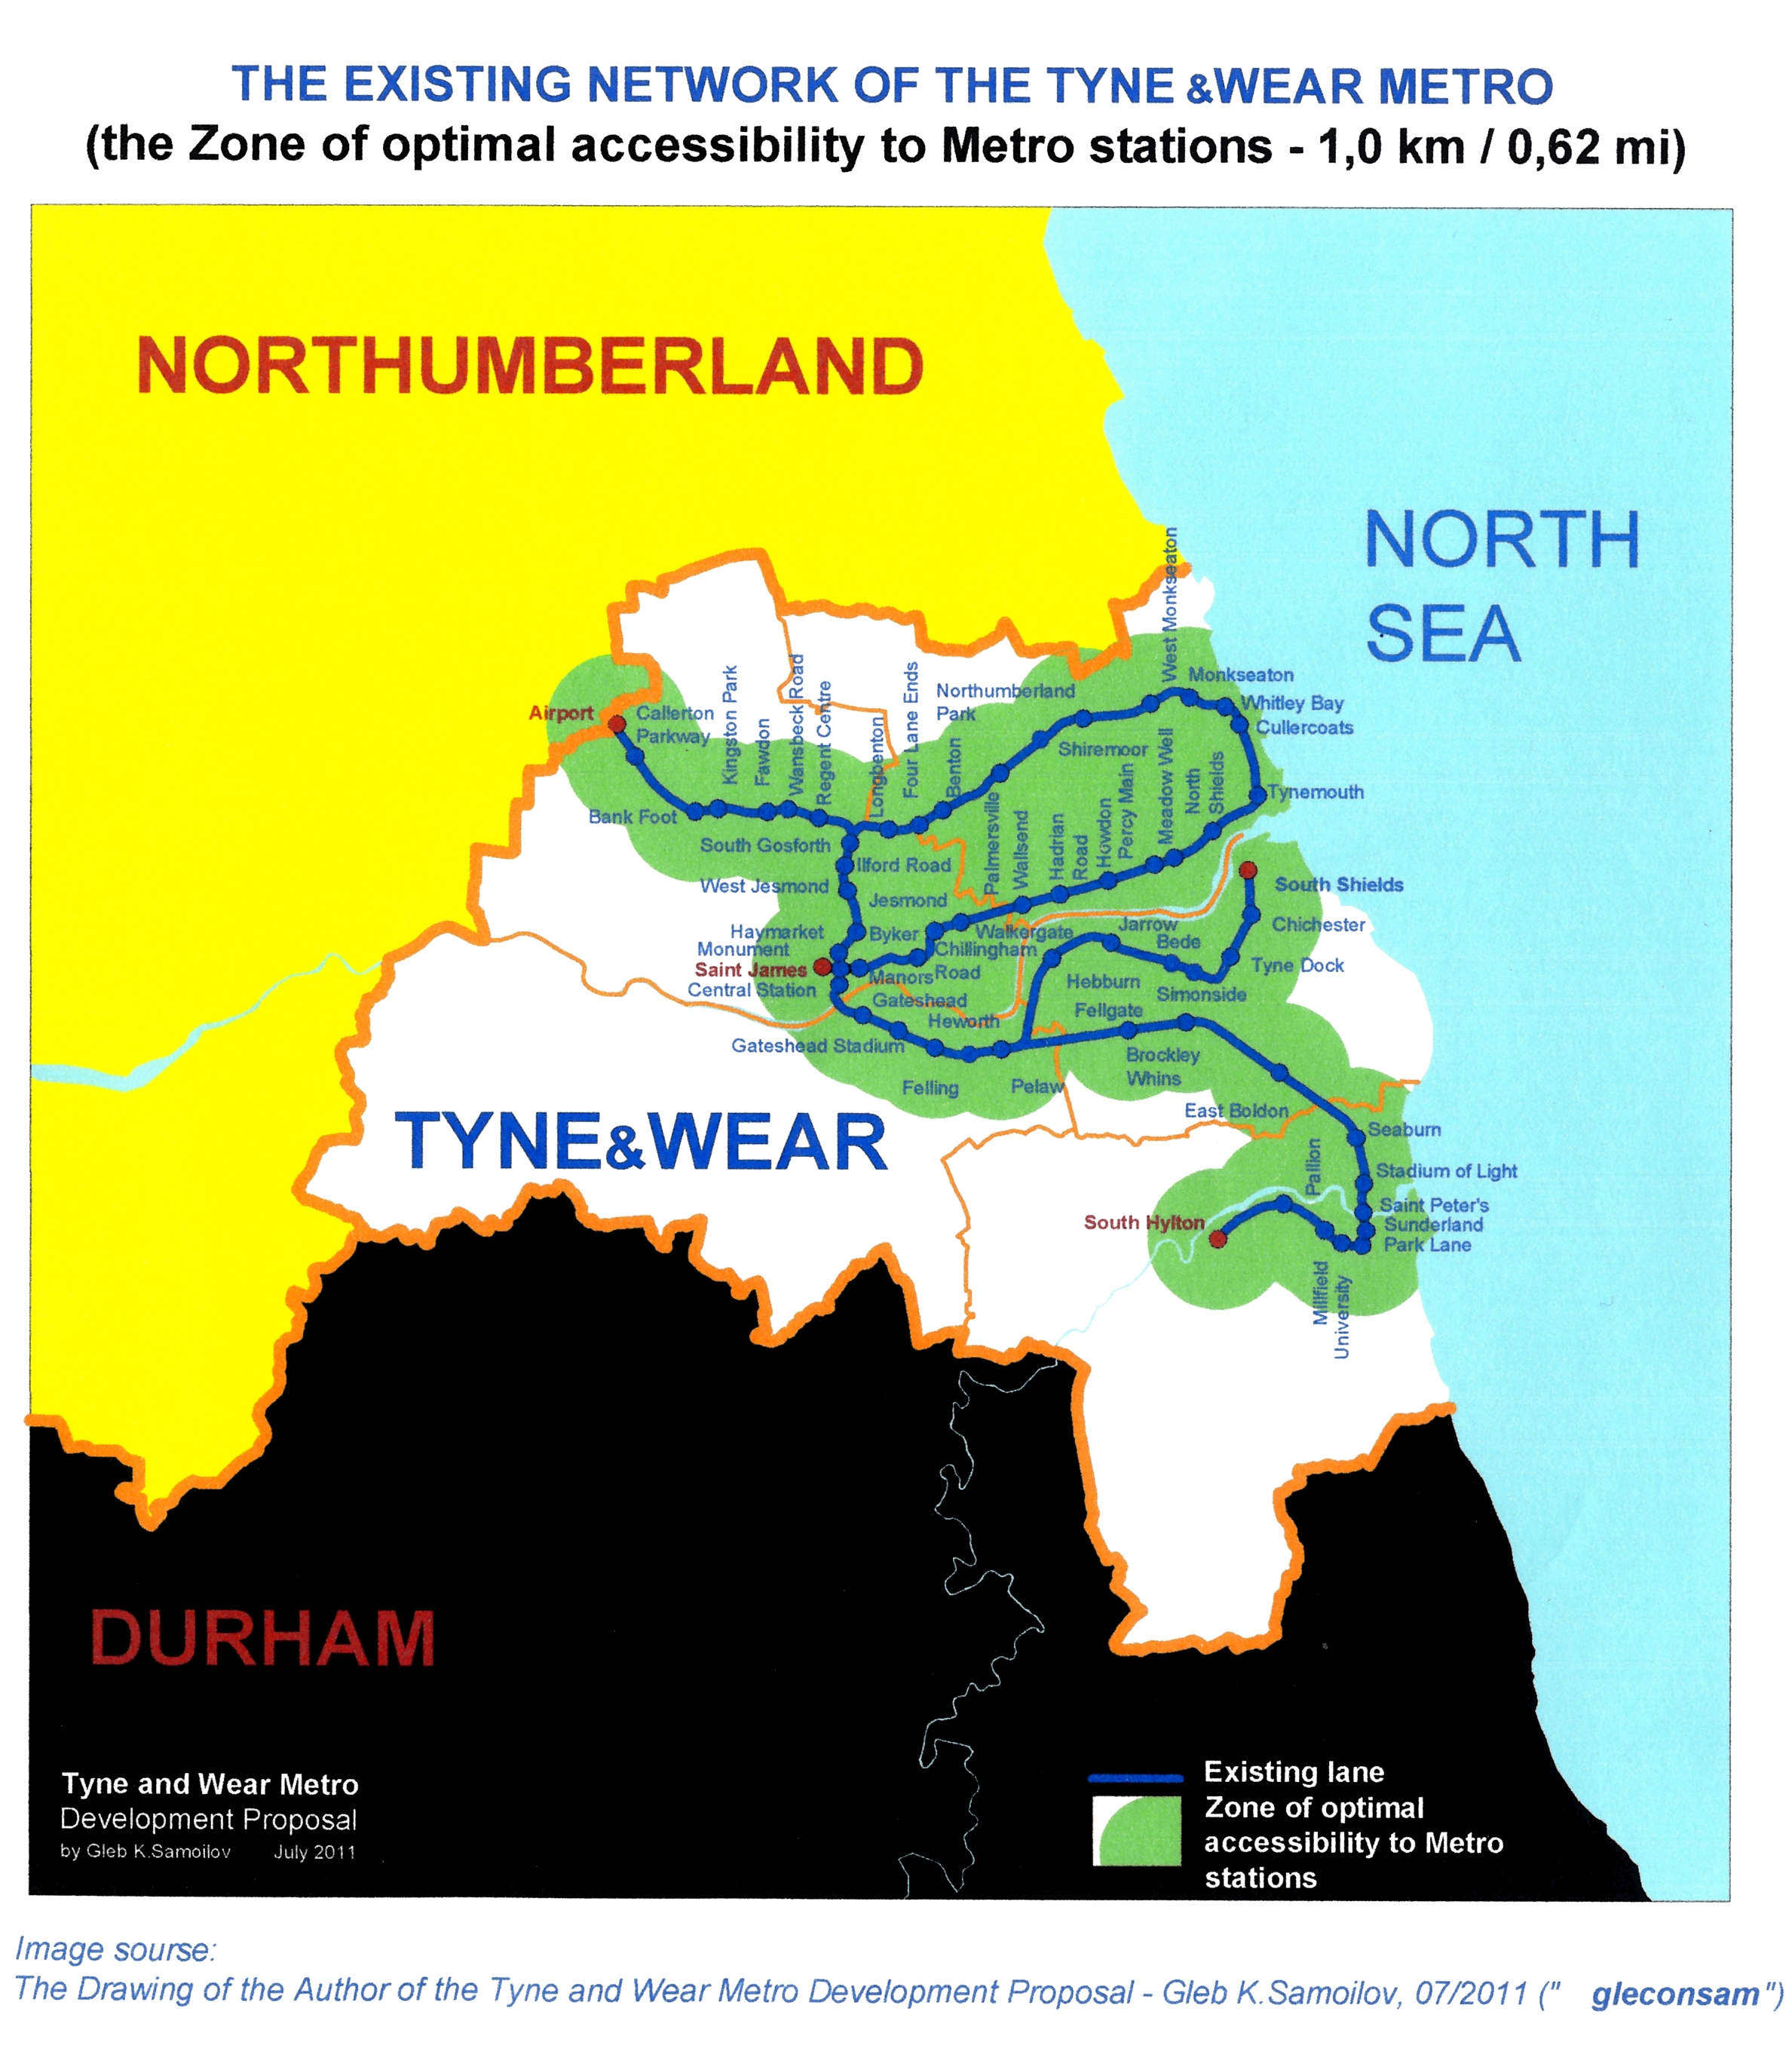 TYNE and WEAR METRO - the Zone of Optimal accessibility of existing Metro Network